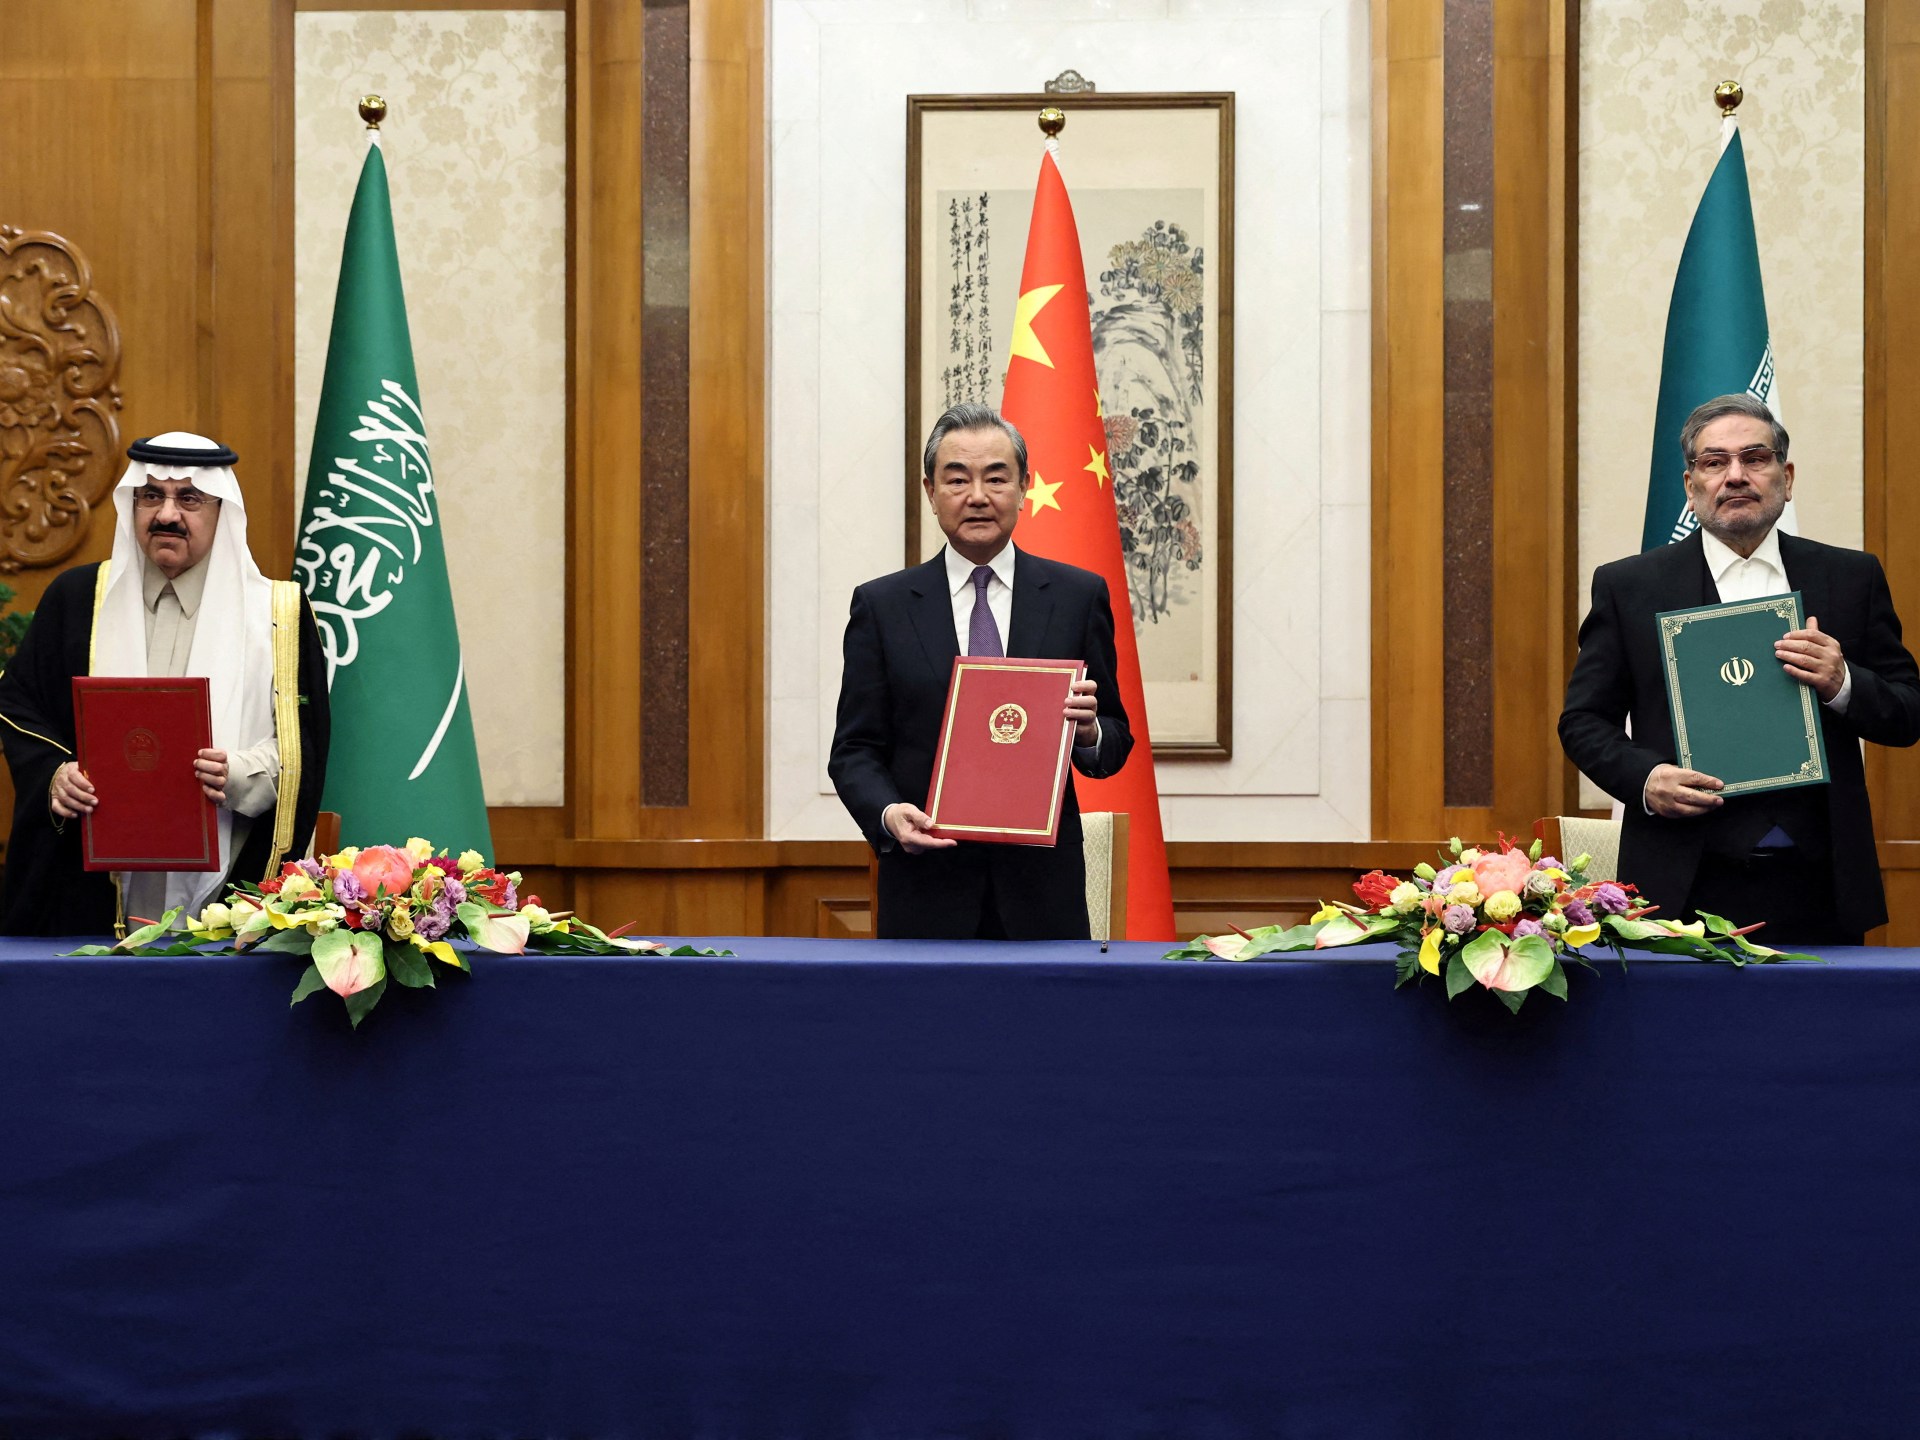 Foreign ministers of Iran, Saudi Arabia meet in China